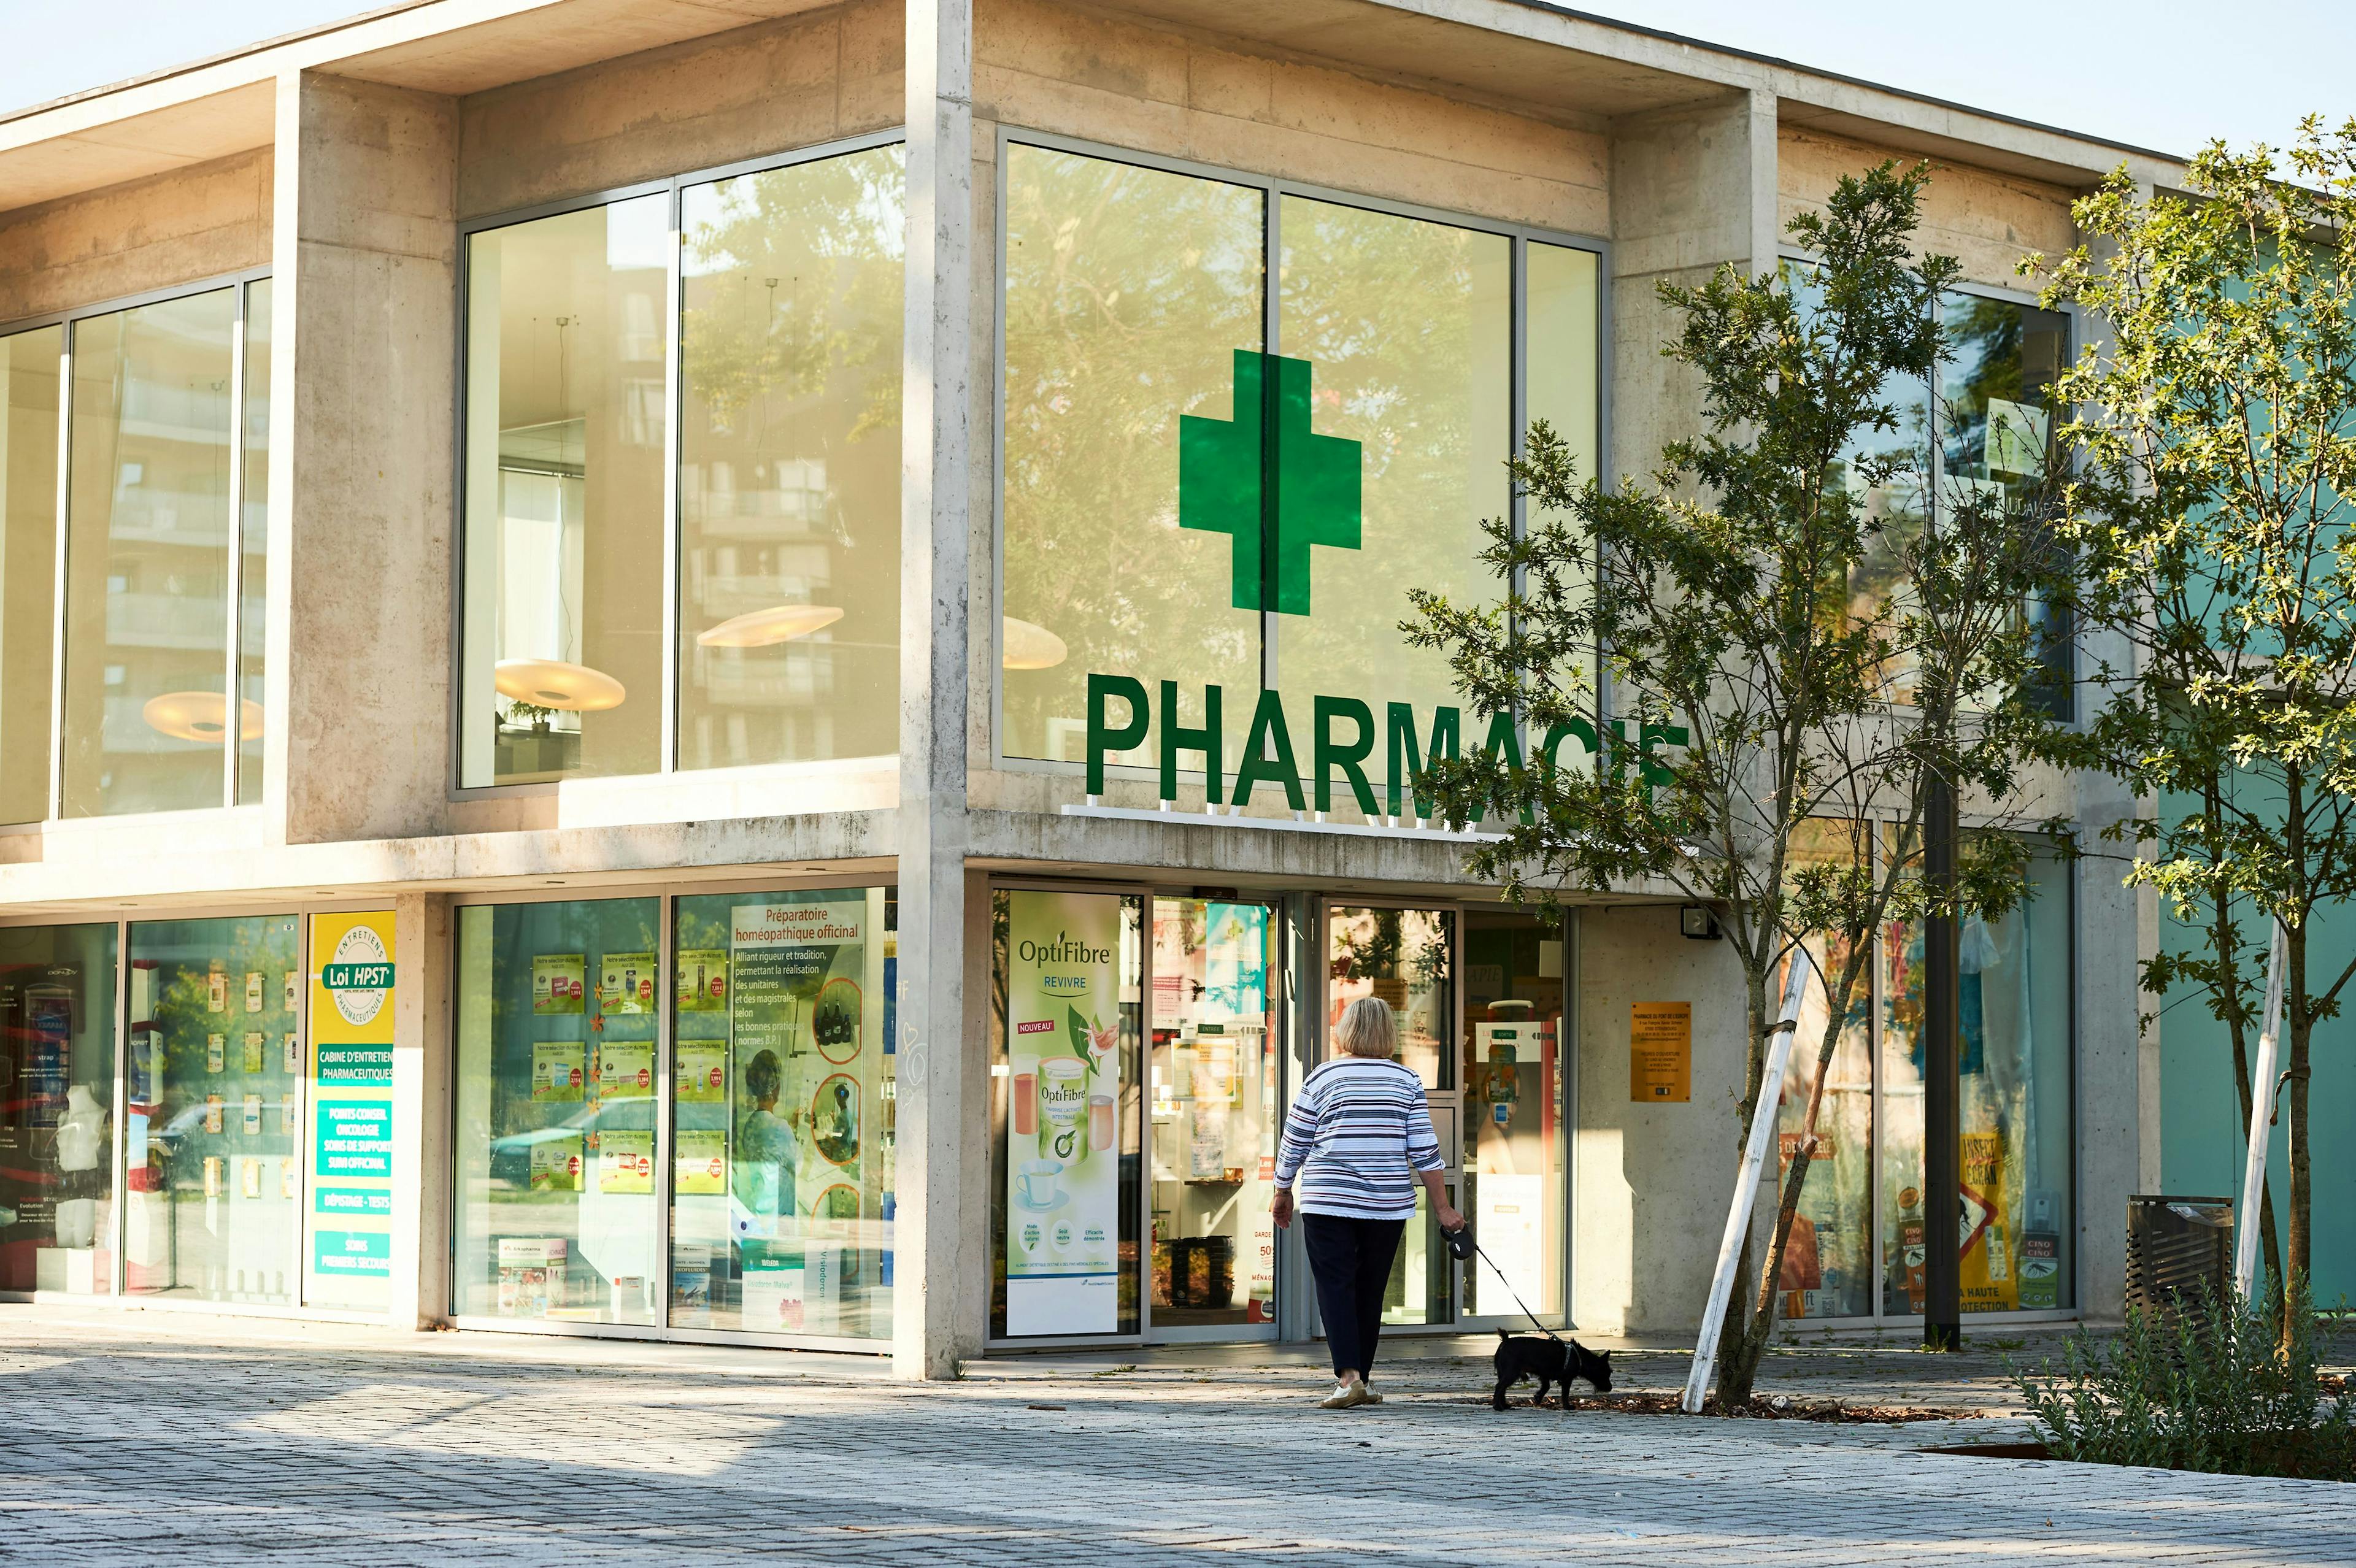 Four Tactics to Bring New Customers Into Your Independent Pharmacy